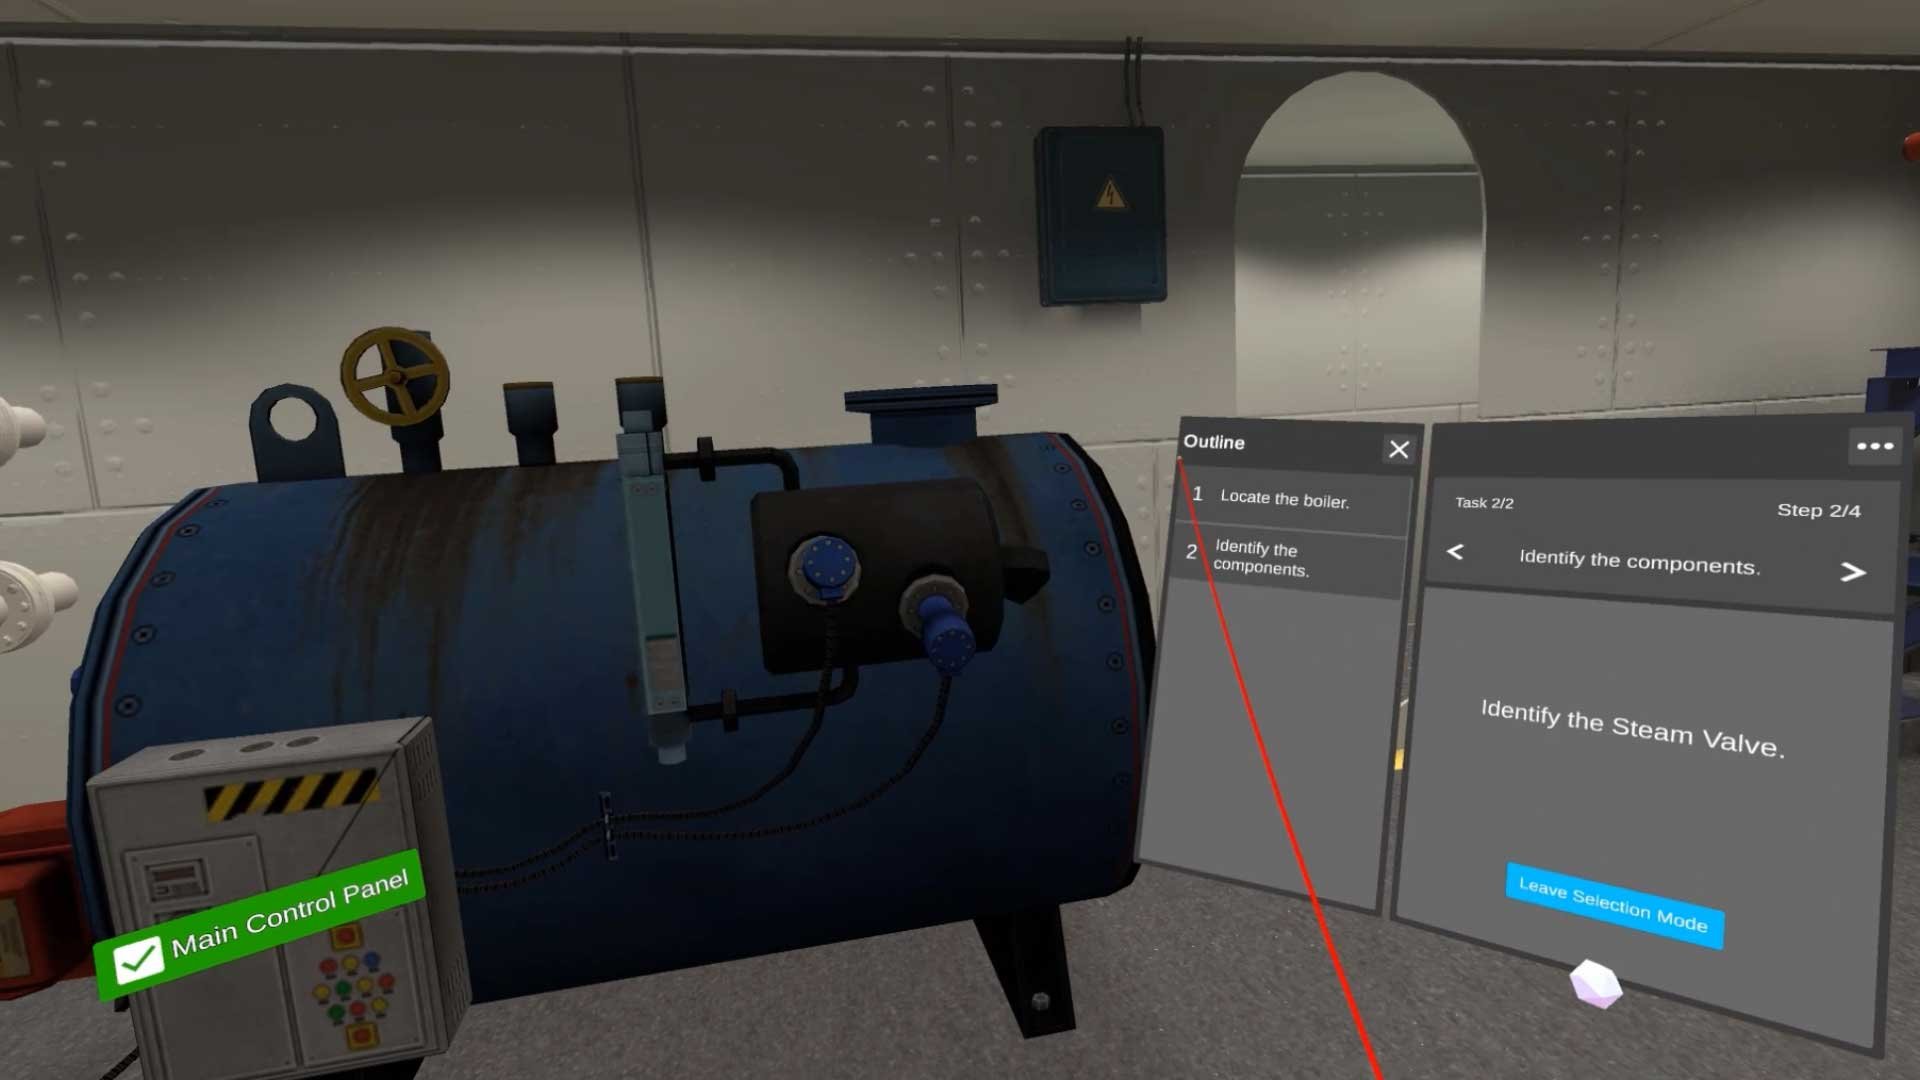 Using Virtual Reality for training to identify a main control panel and steam valve in a shipbuilding environment.